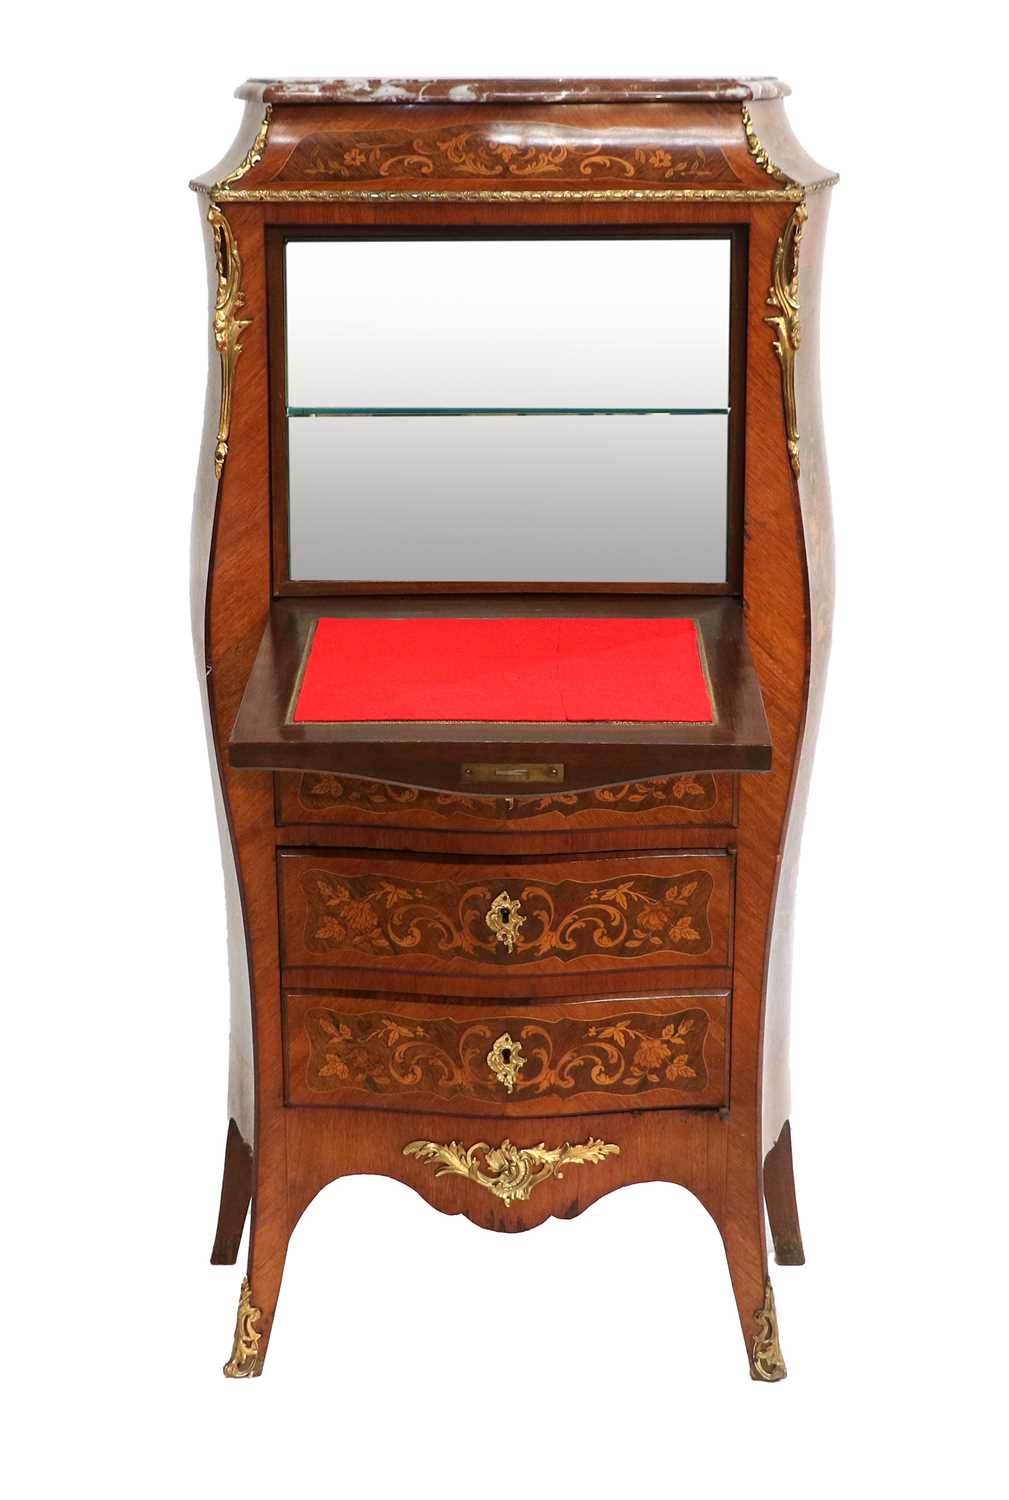 A Louis XV-Style Kingwood, Rosewood and Marquetry-Inlaid Secretaire Abattant, circa 1900, the staged - Image 2 of 3